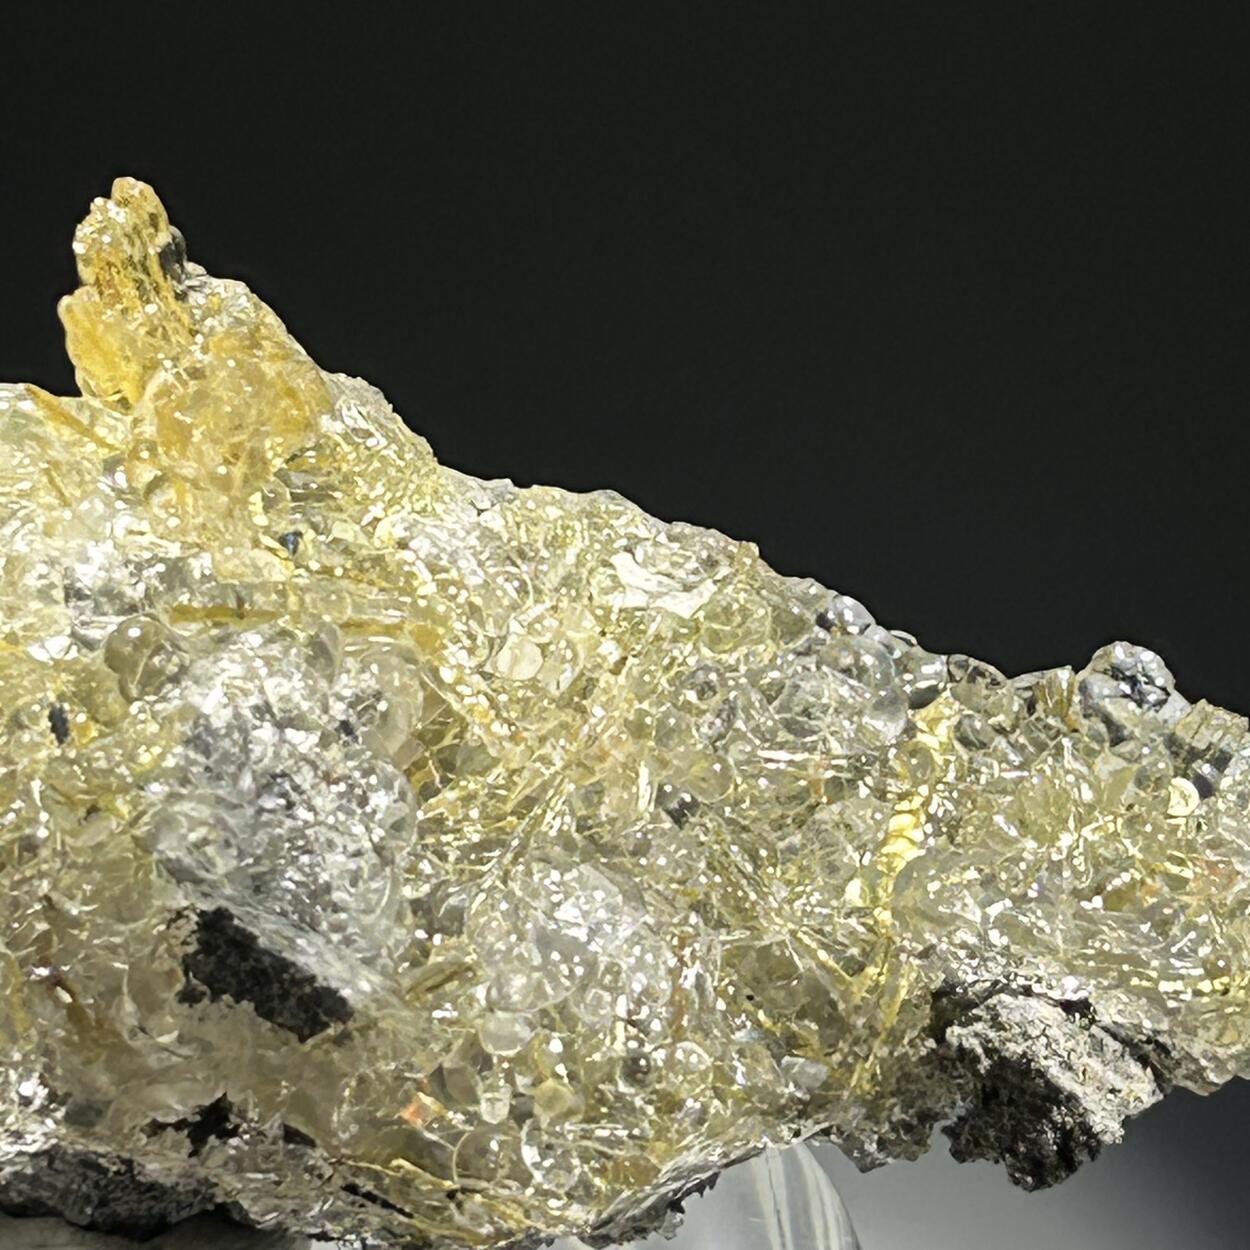 Hyalite With Rutile Inclusions